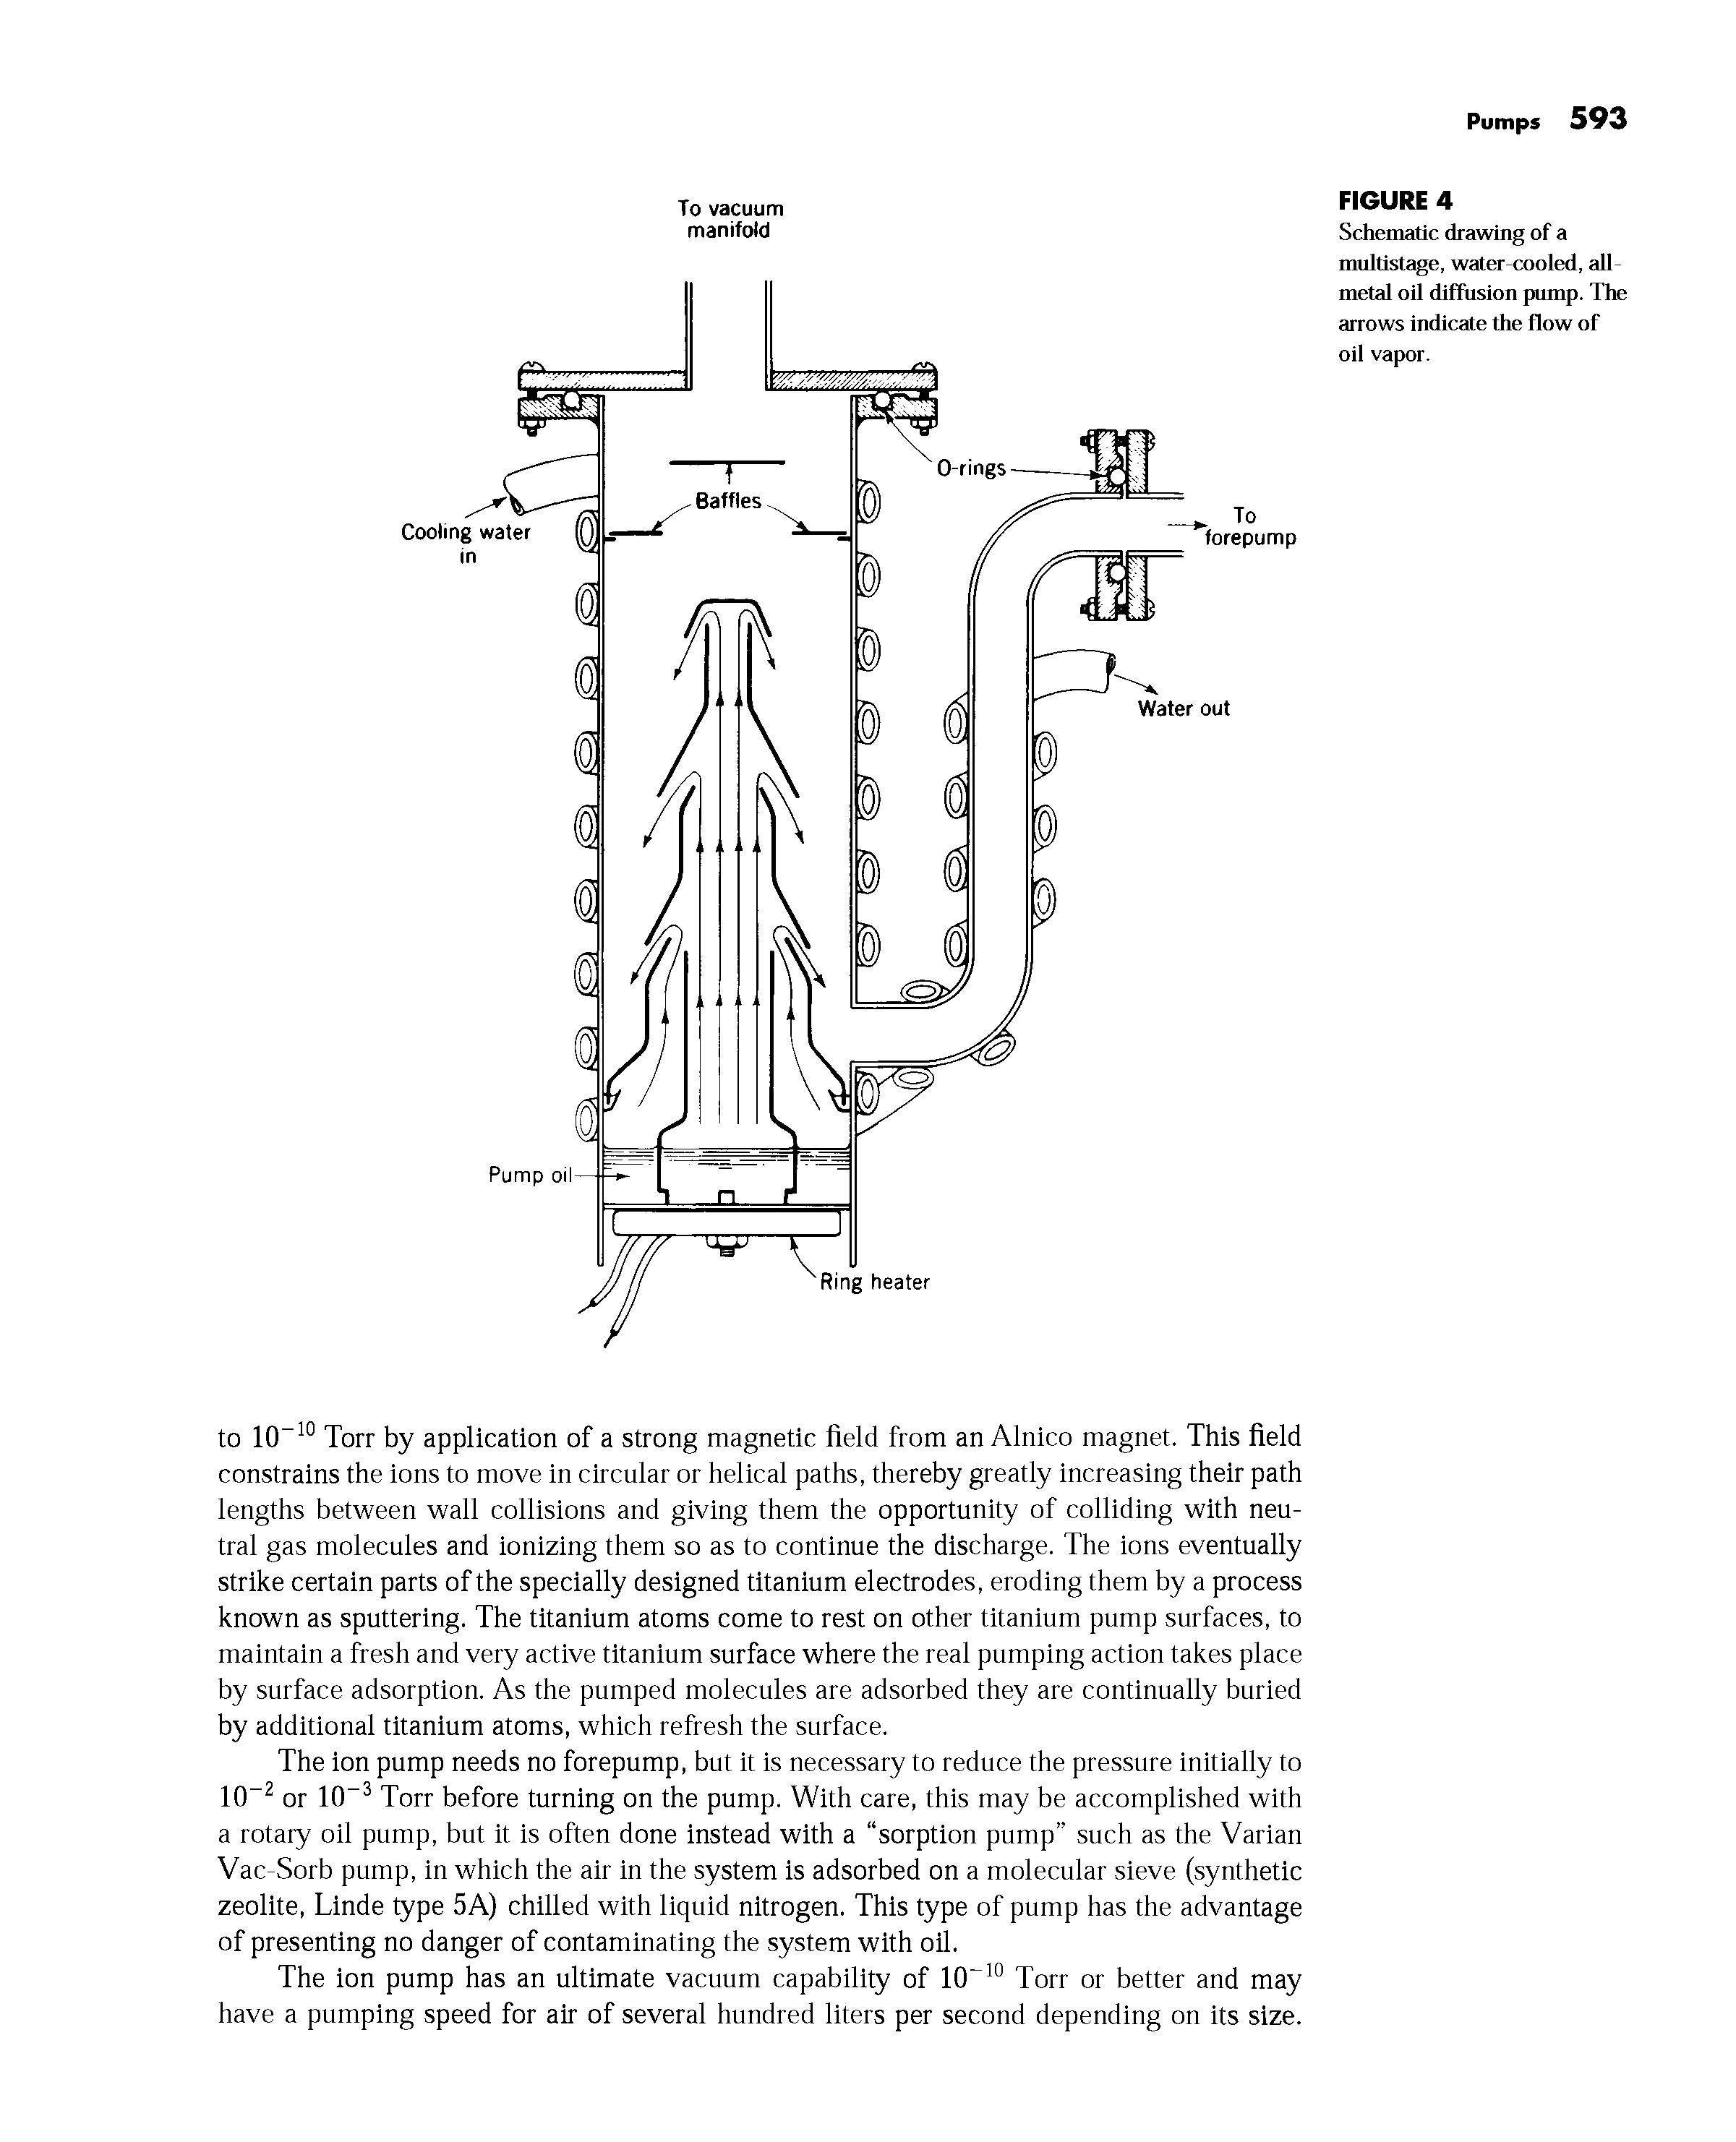 Schematic drawing of a multistage, water-cooled, all-metal oil diffusion pump. The arrows indicate the flow of oil vapor.